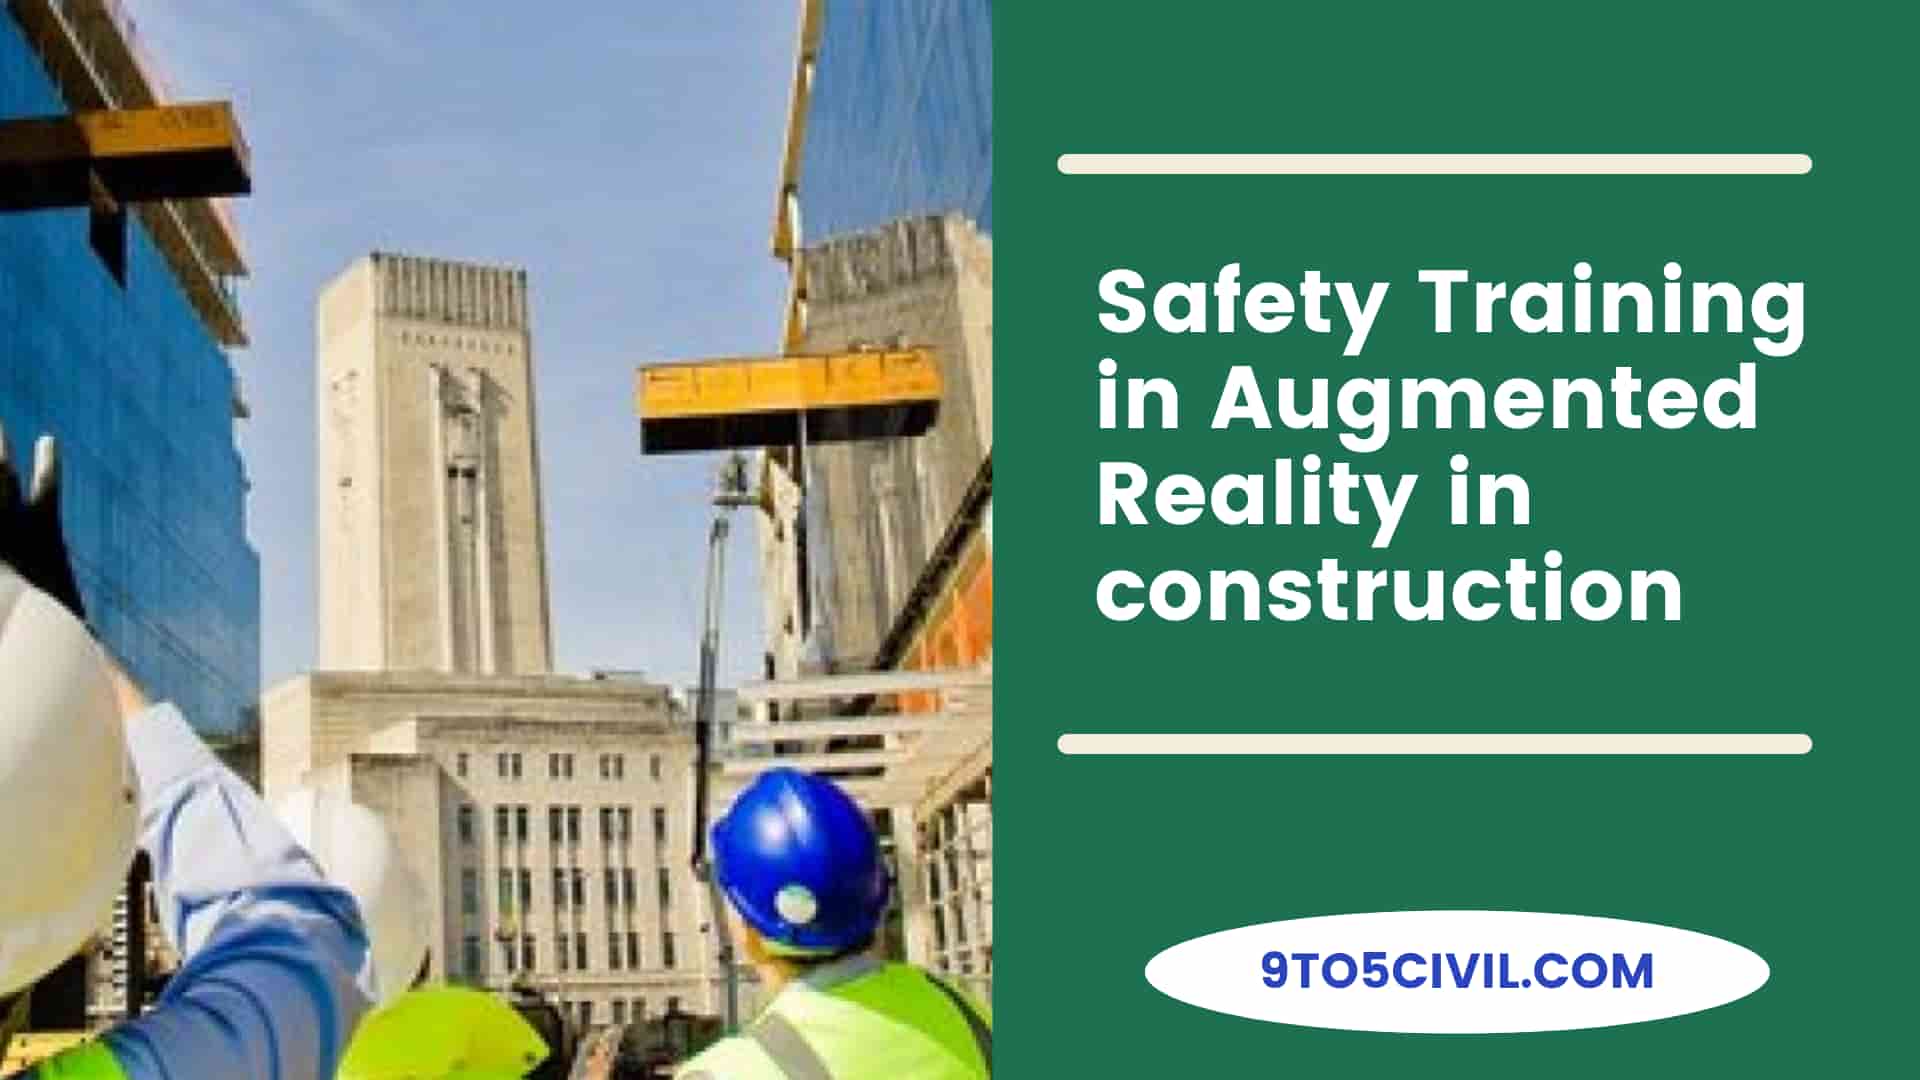 Safety Training in Augmented Reality in construction